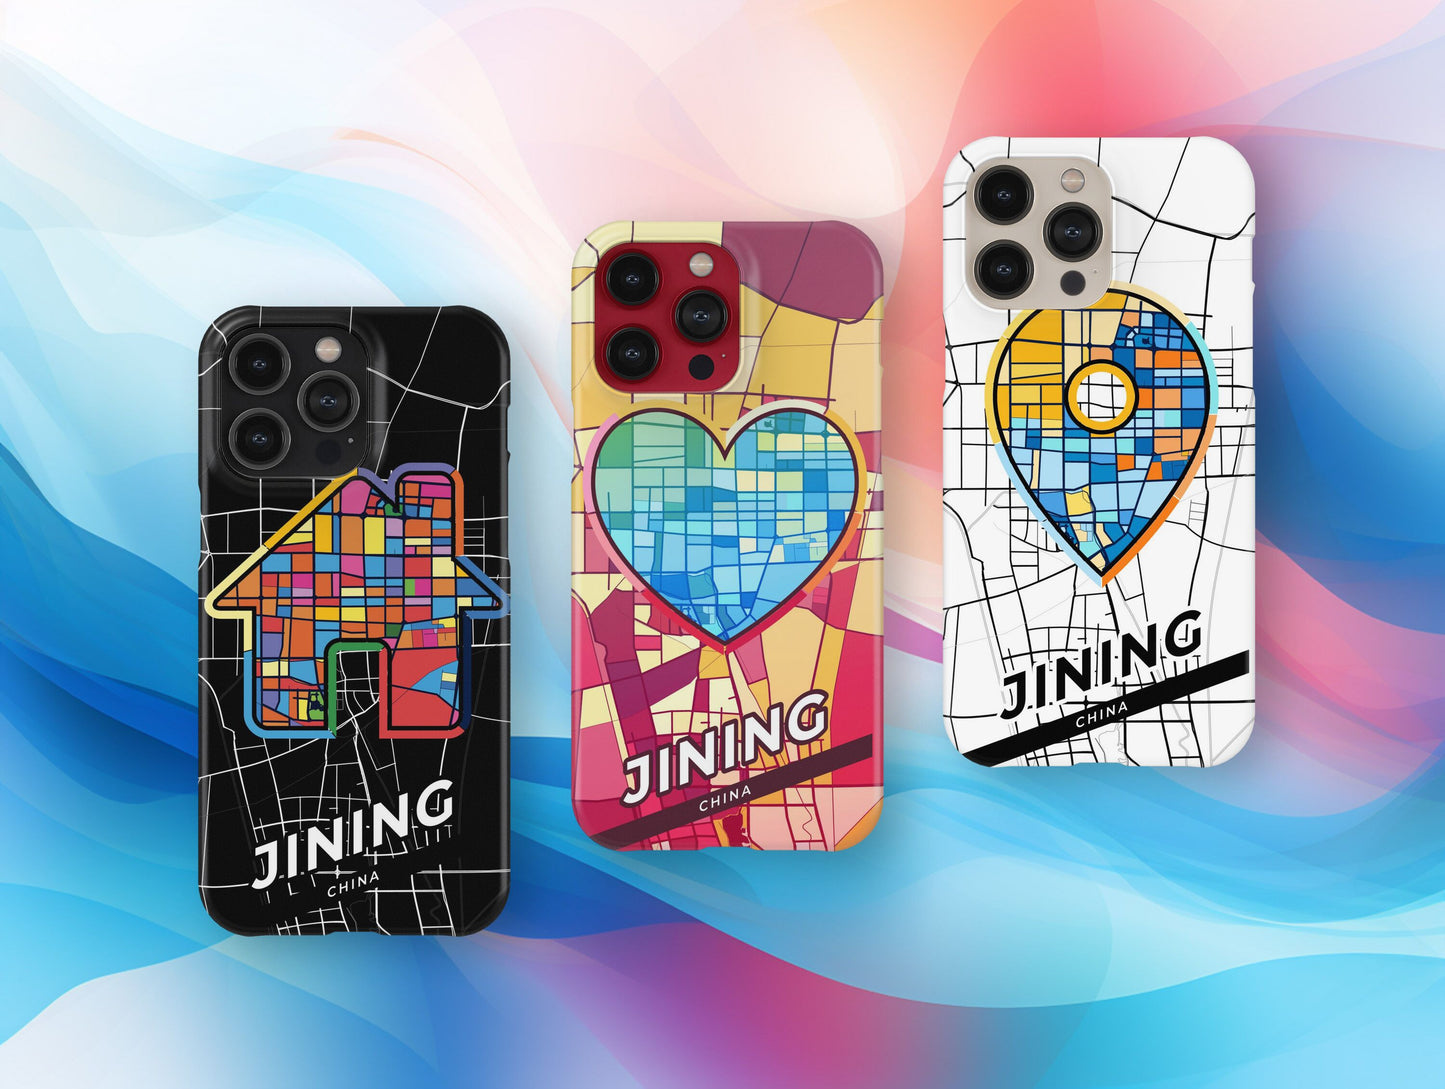 Jining China slim phone case with colorful icon. Birthday, wedding or housewarming gift. Couple match cases.